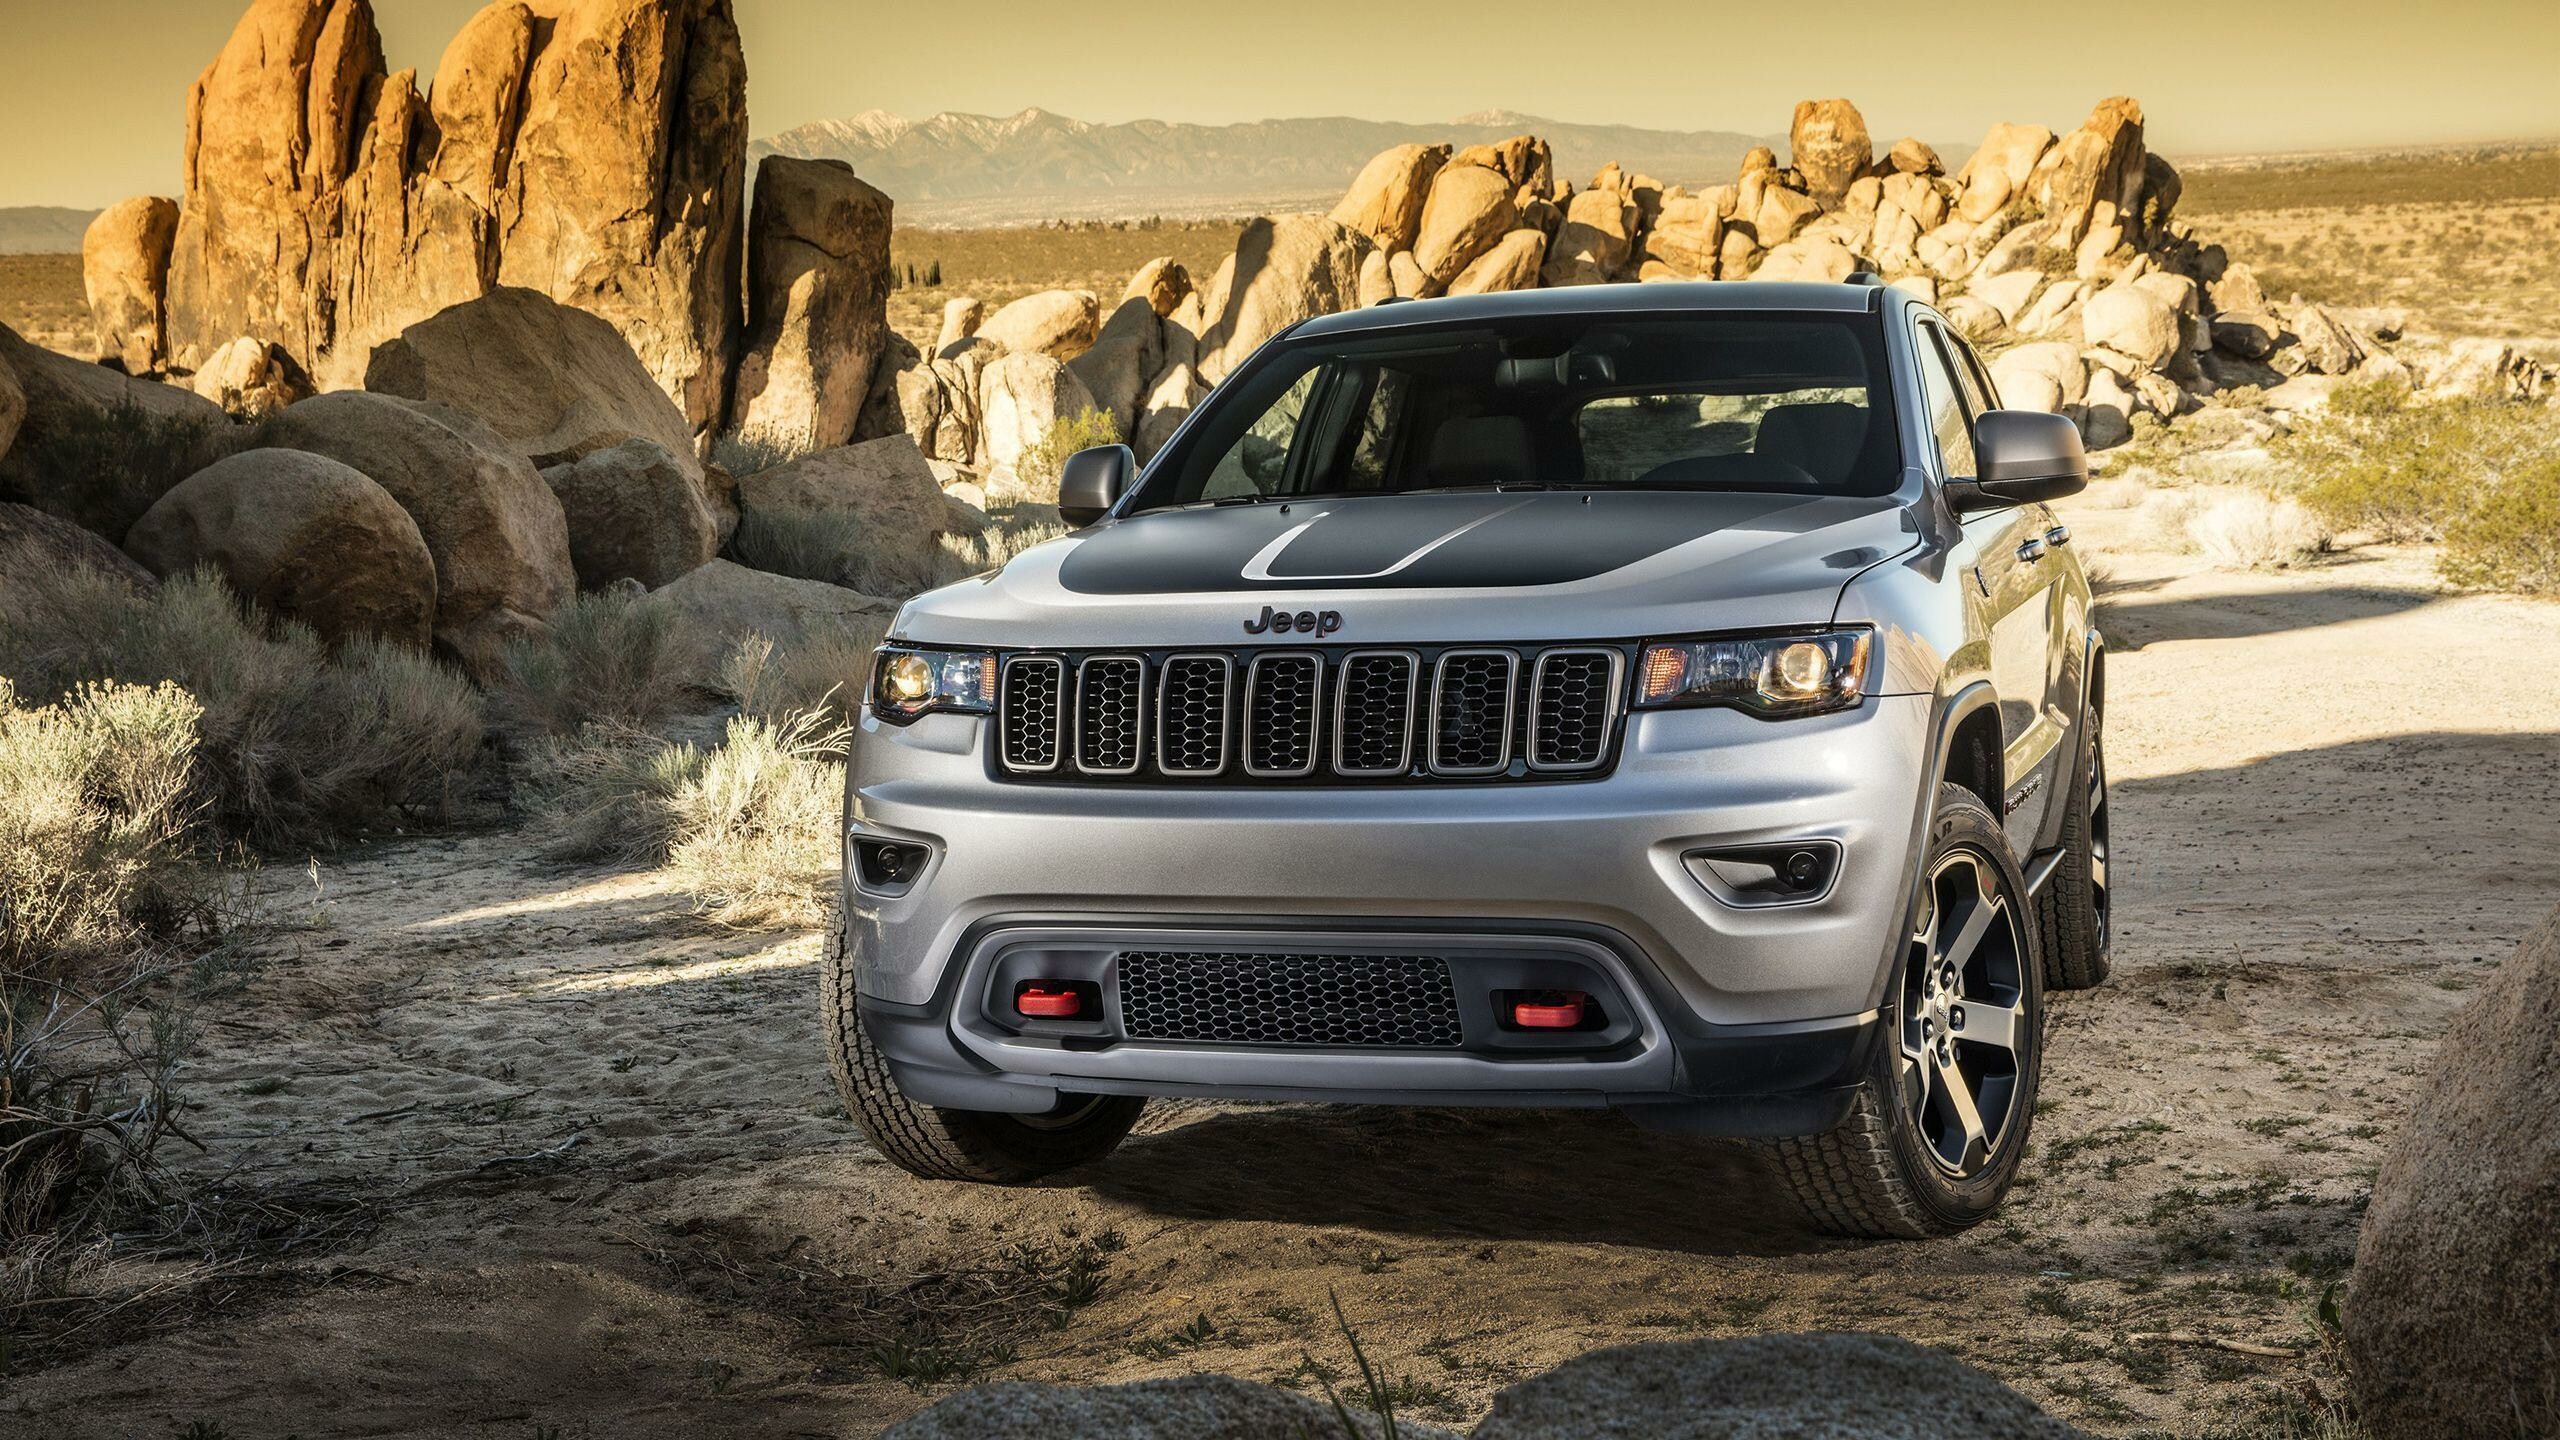 Jeep Grand Cherokee: SUVs, Manufactured with body-on-frame construction. 2560x1440 HD Wallpaper.